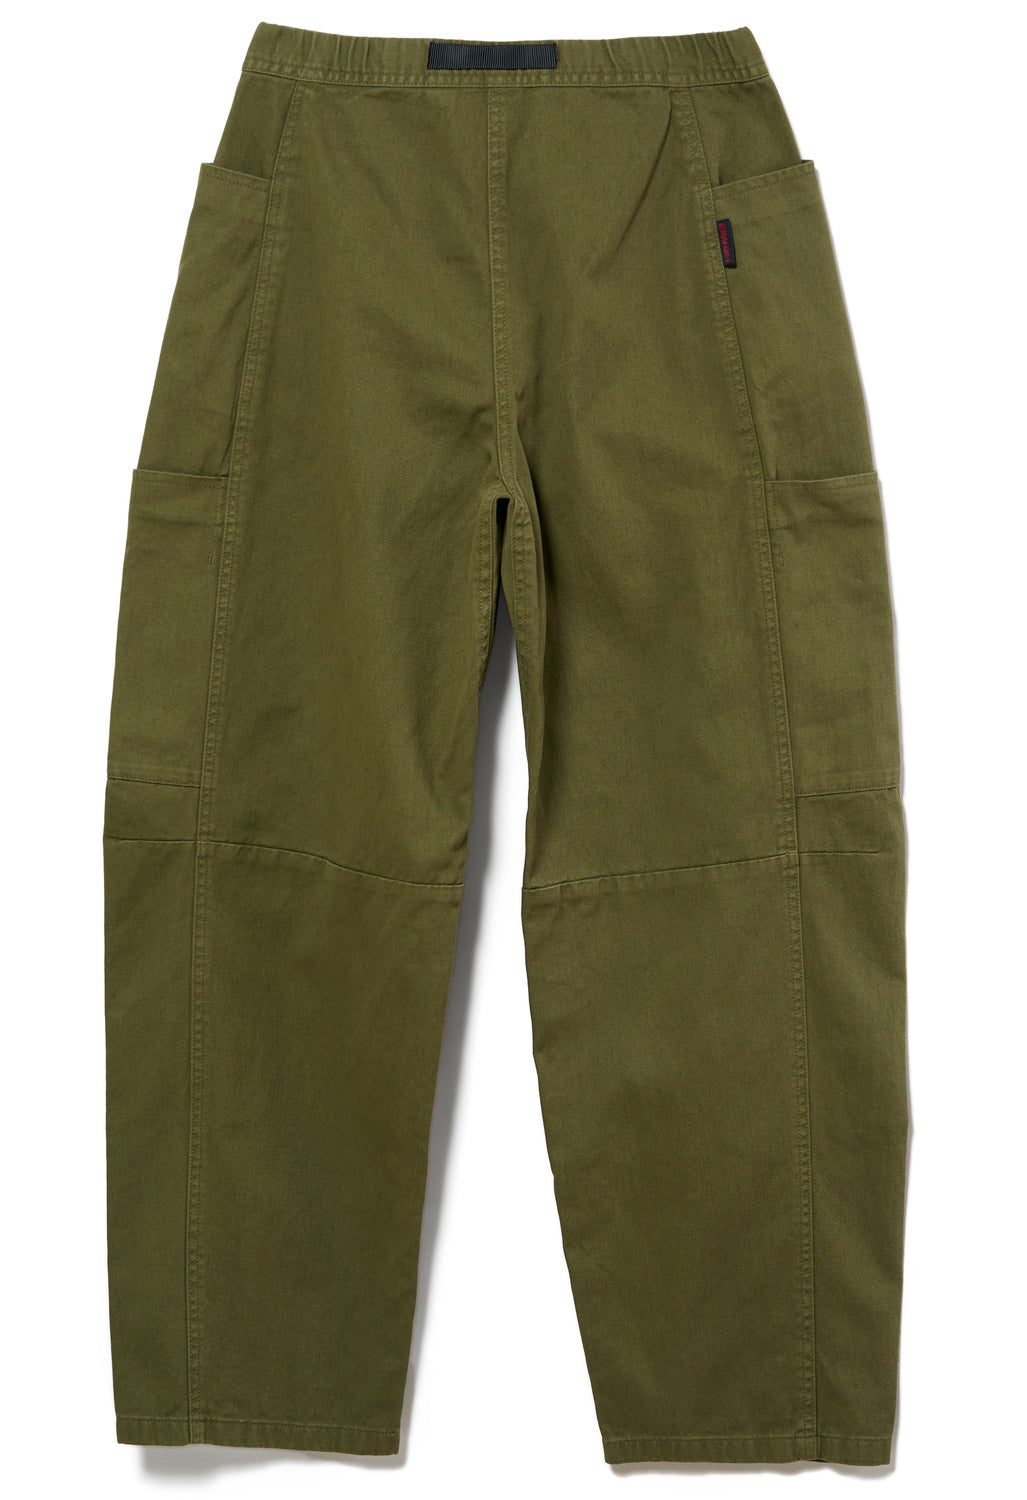 Gramicci Women's Voyager Pants - Olive